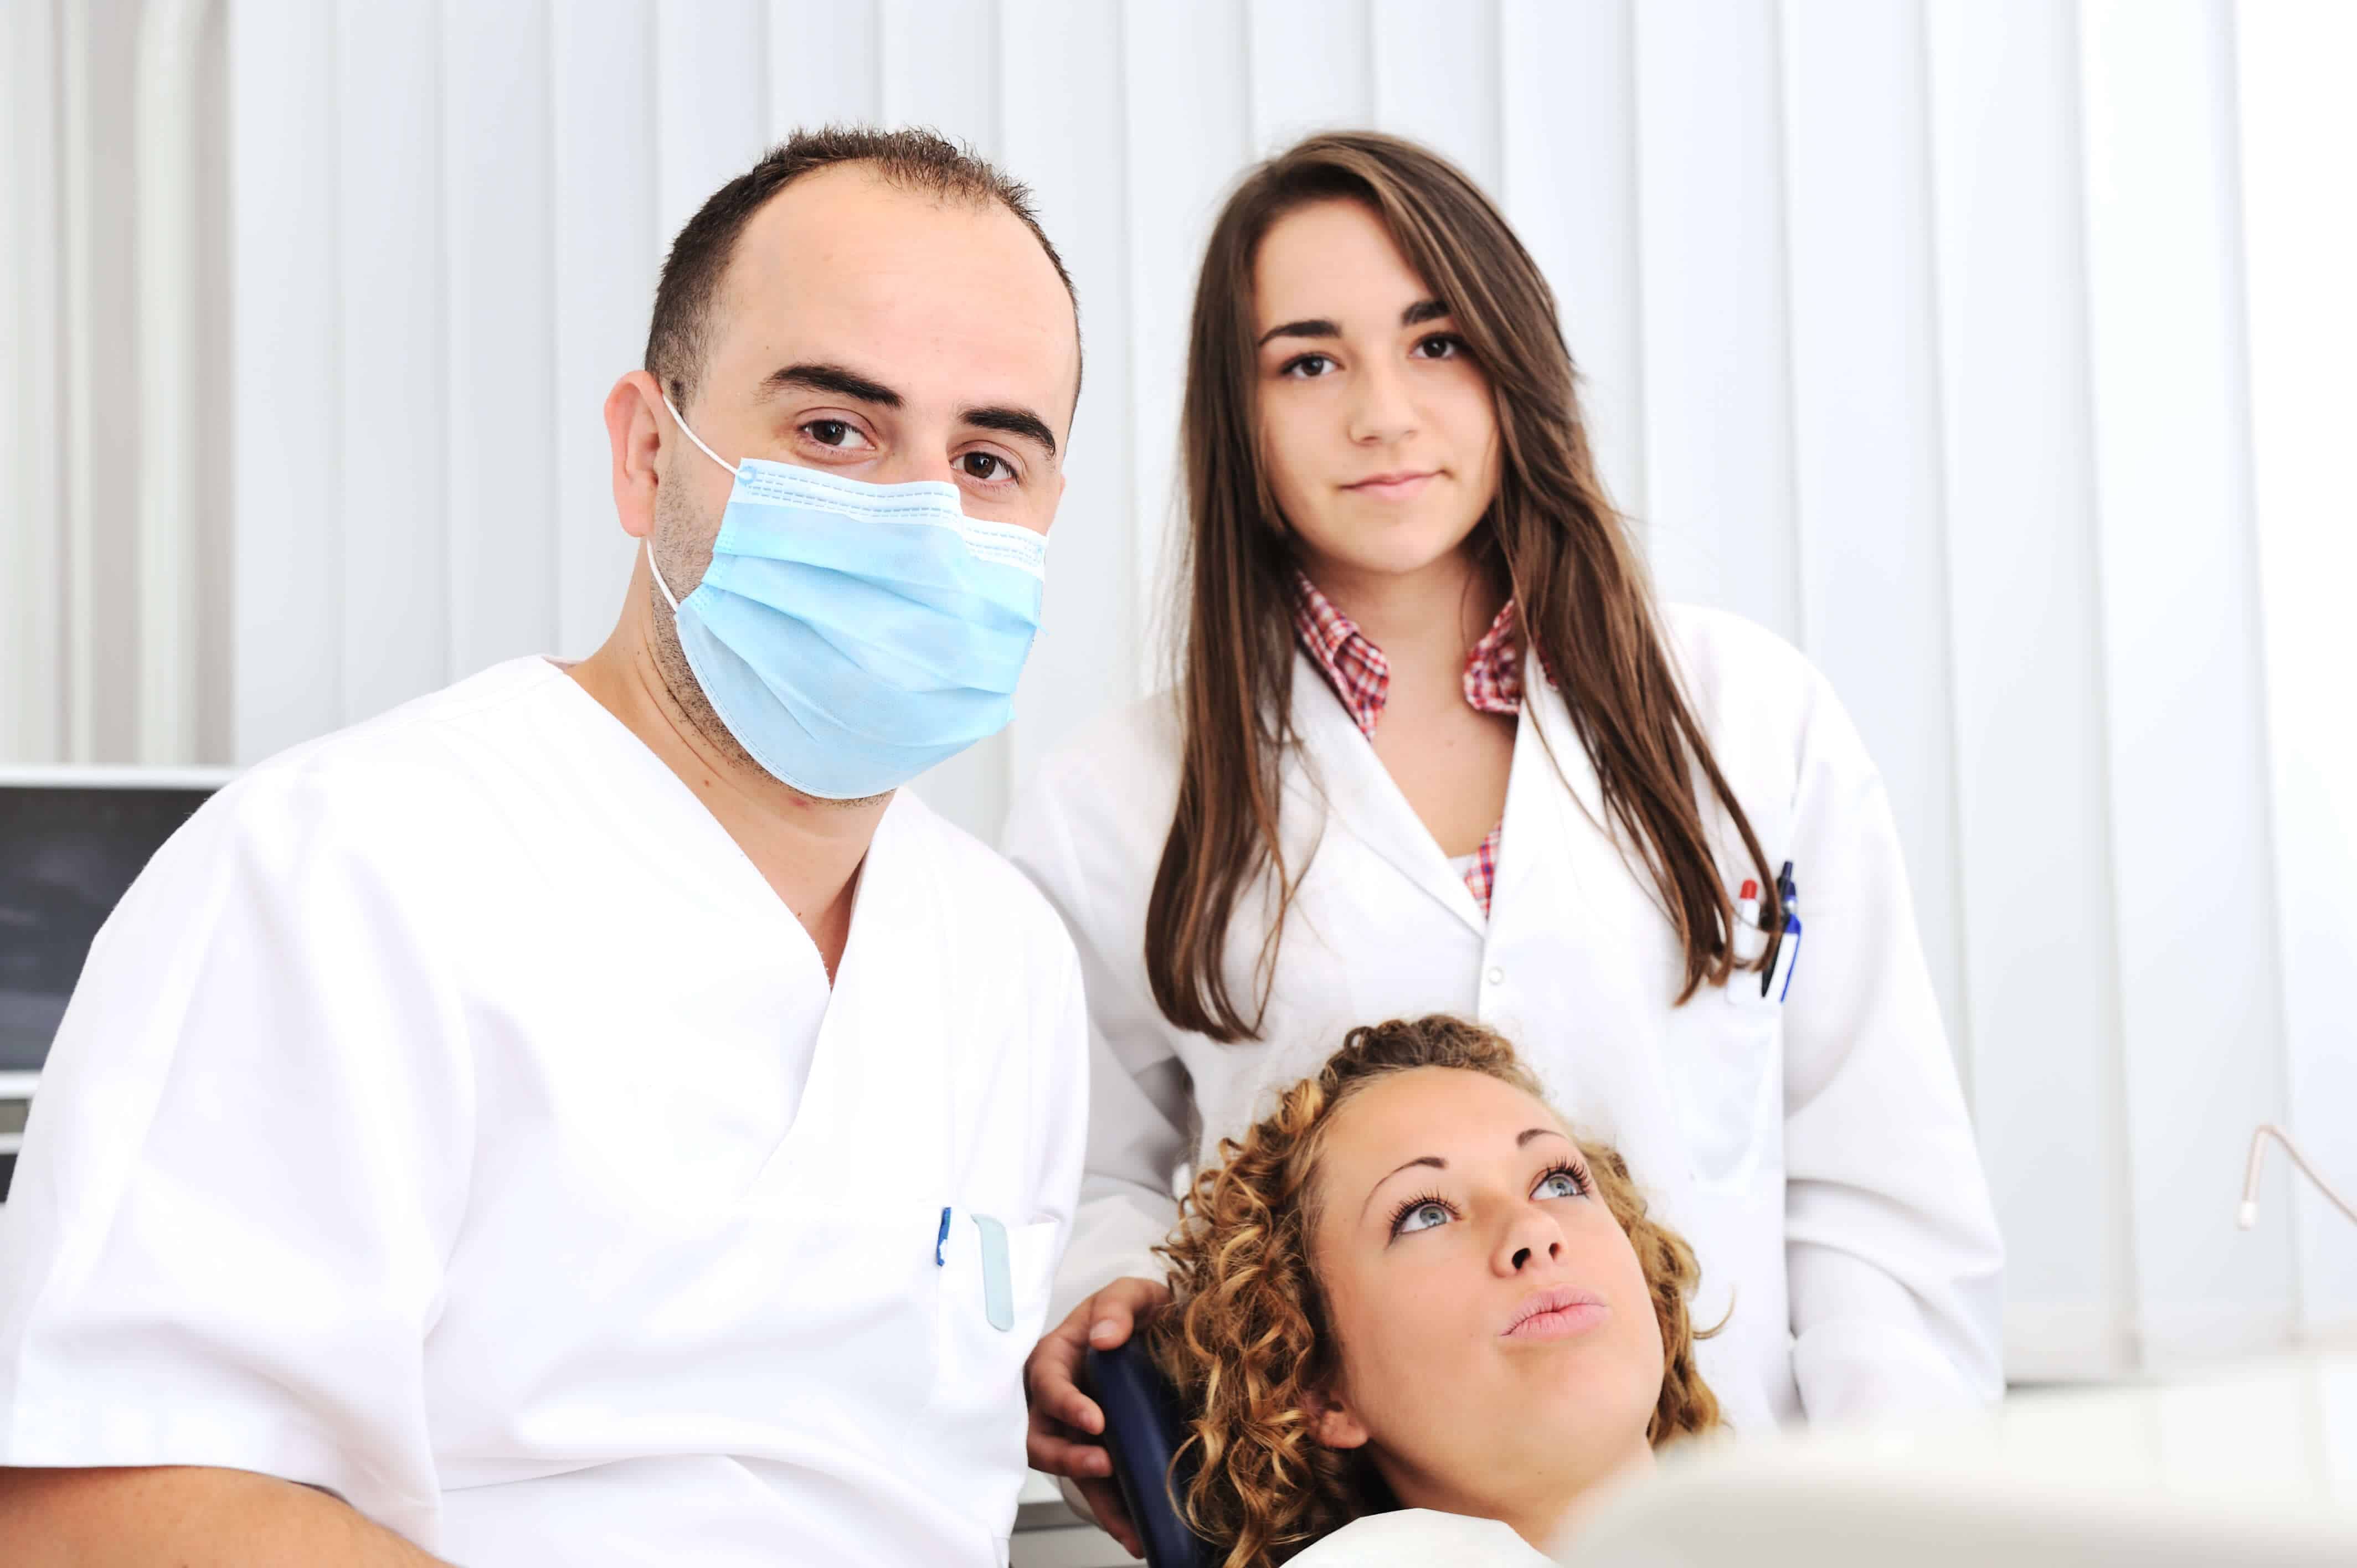 downtown dentistry dentists with patient - oral surgery toronto by downtown dentistry